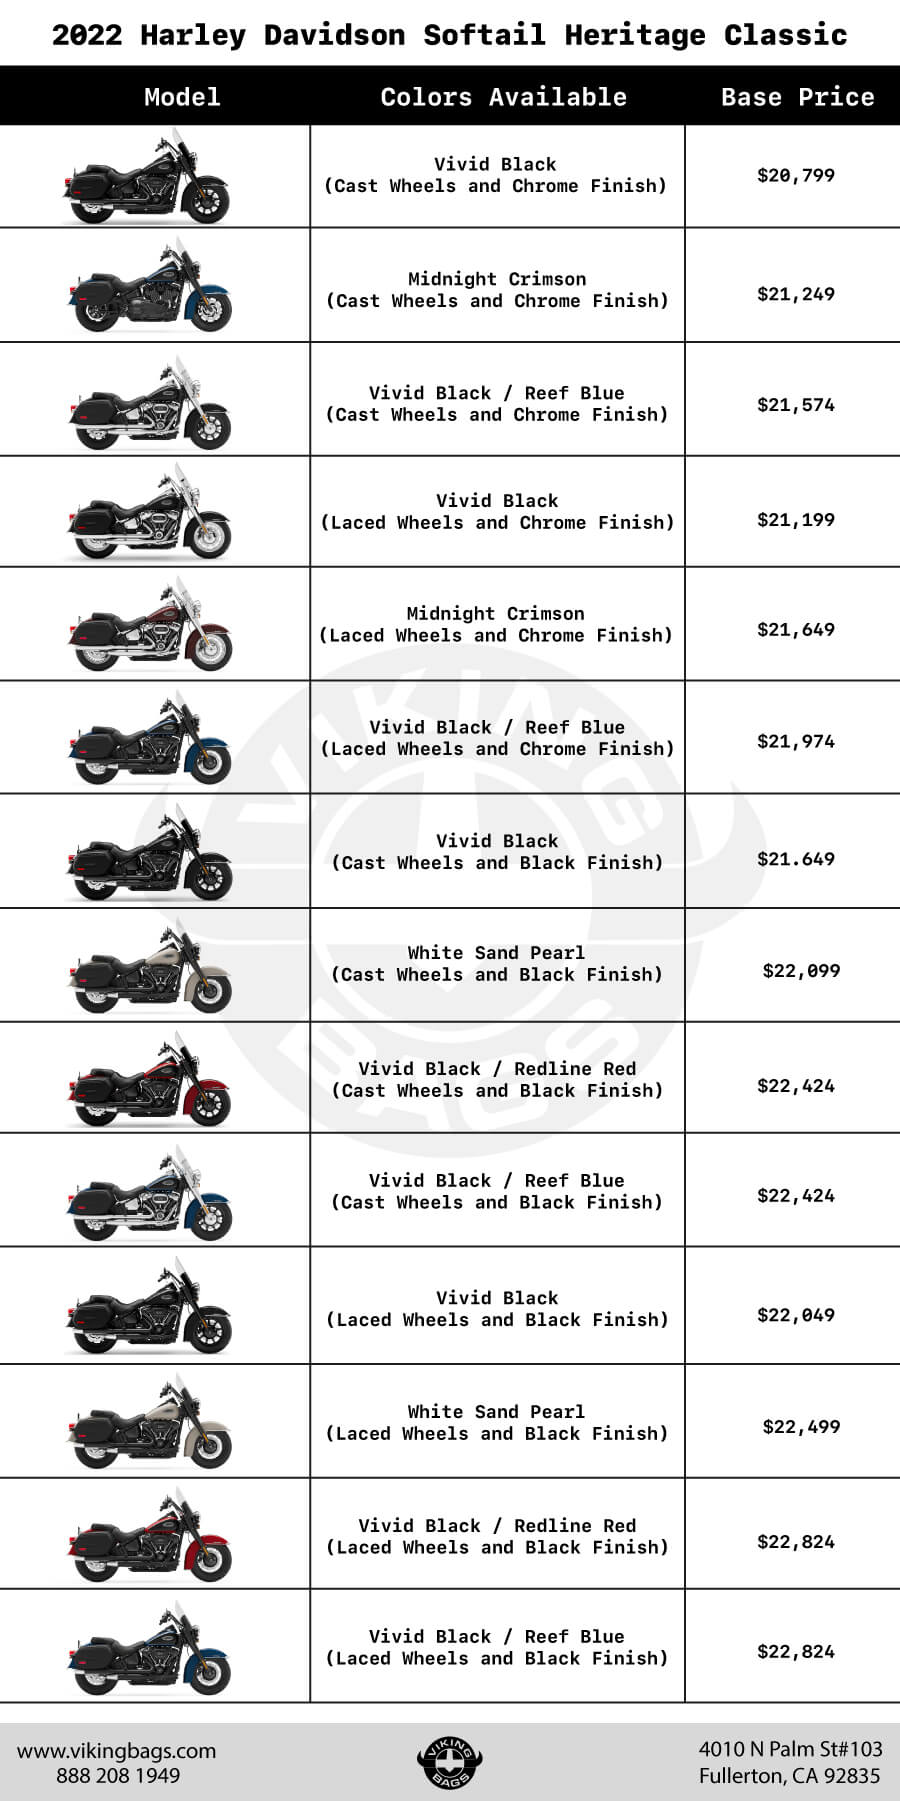 Harley Davidson Softail Heritage Classic: Colors and Cost